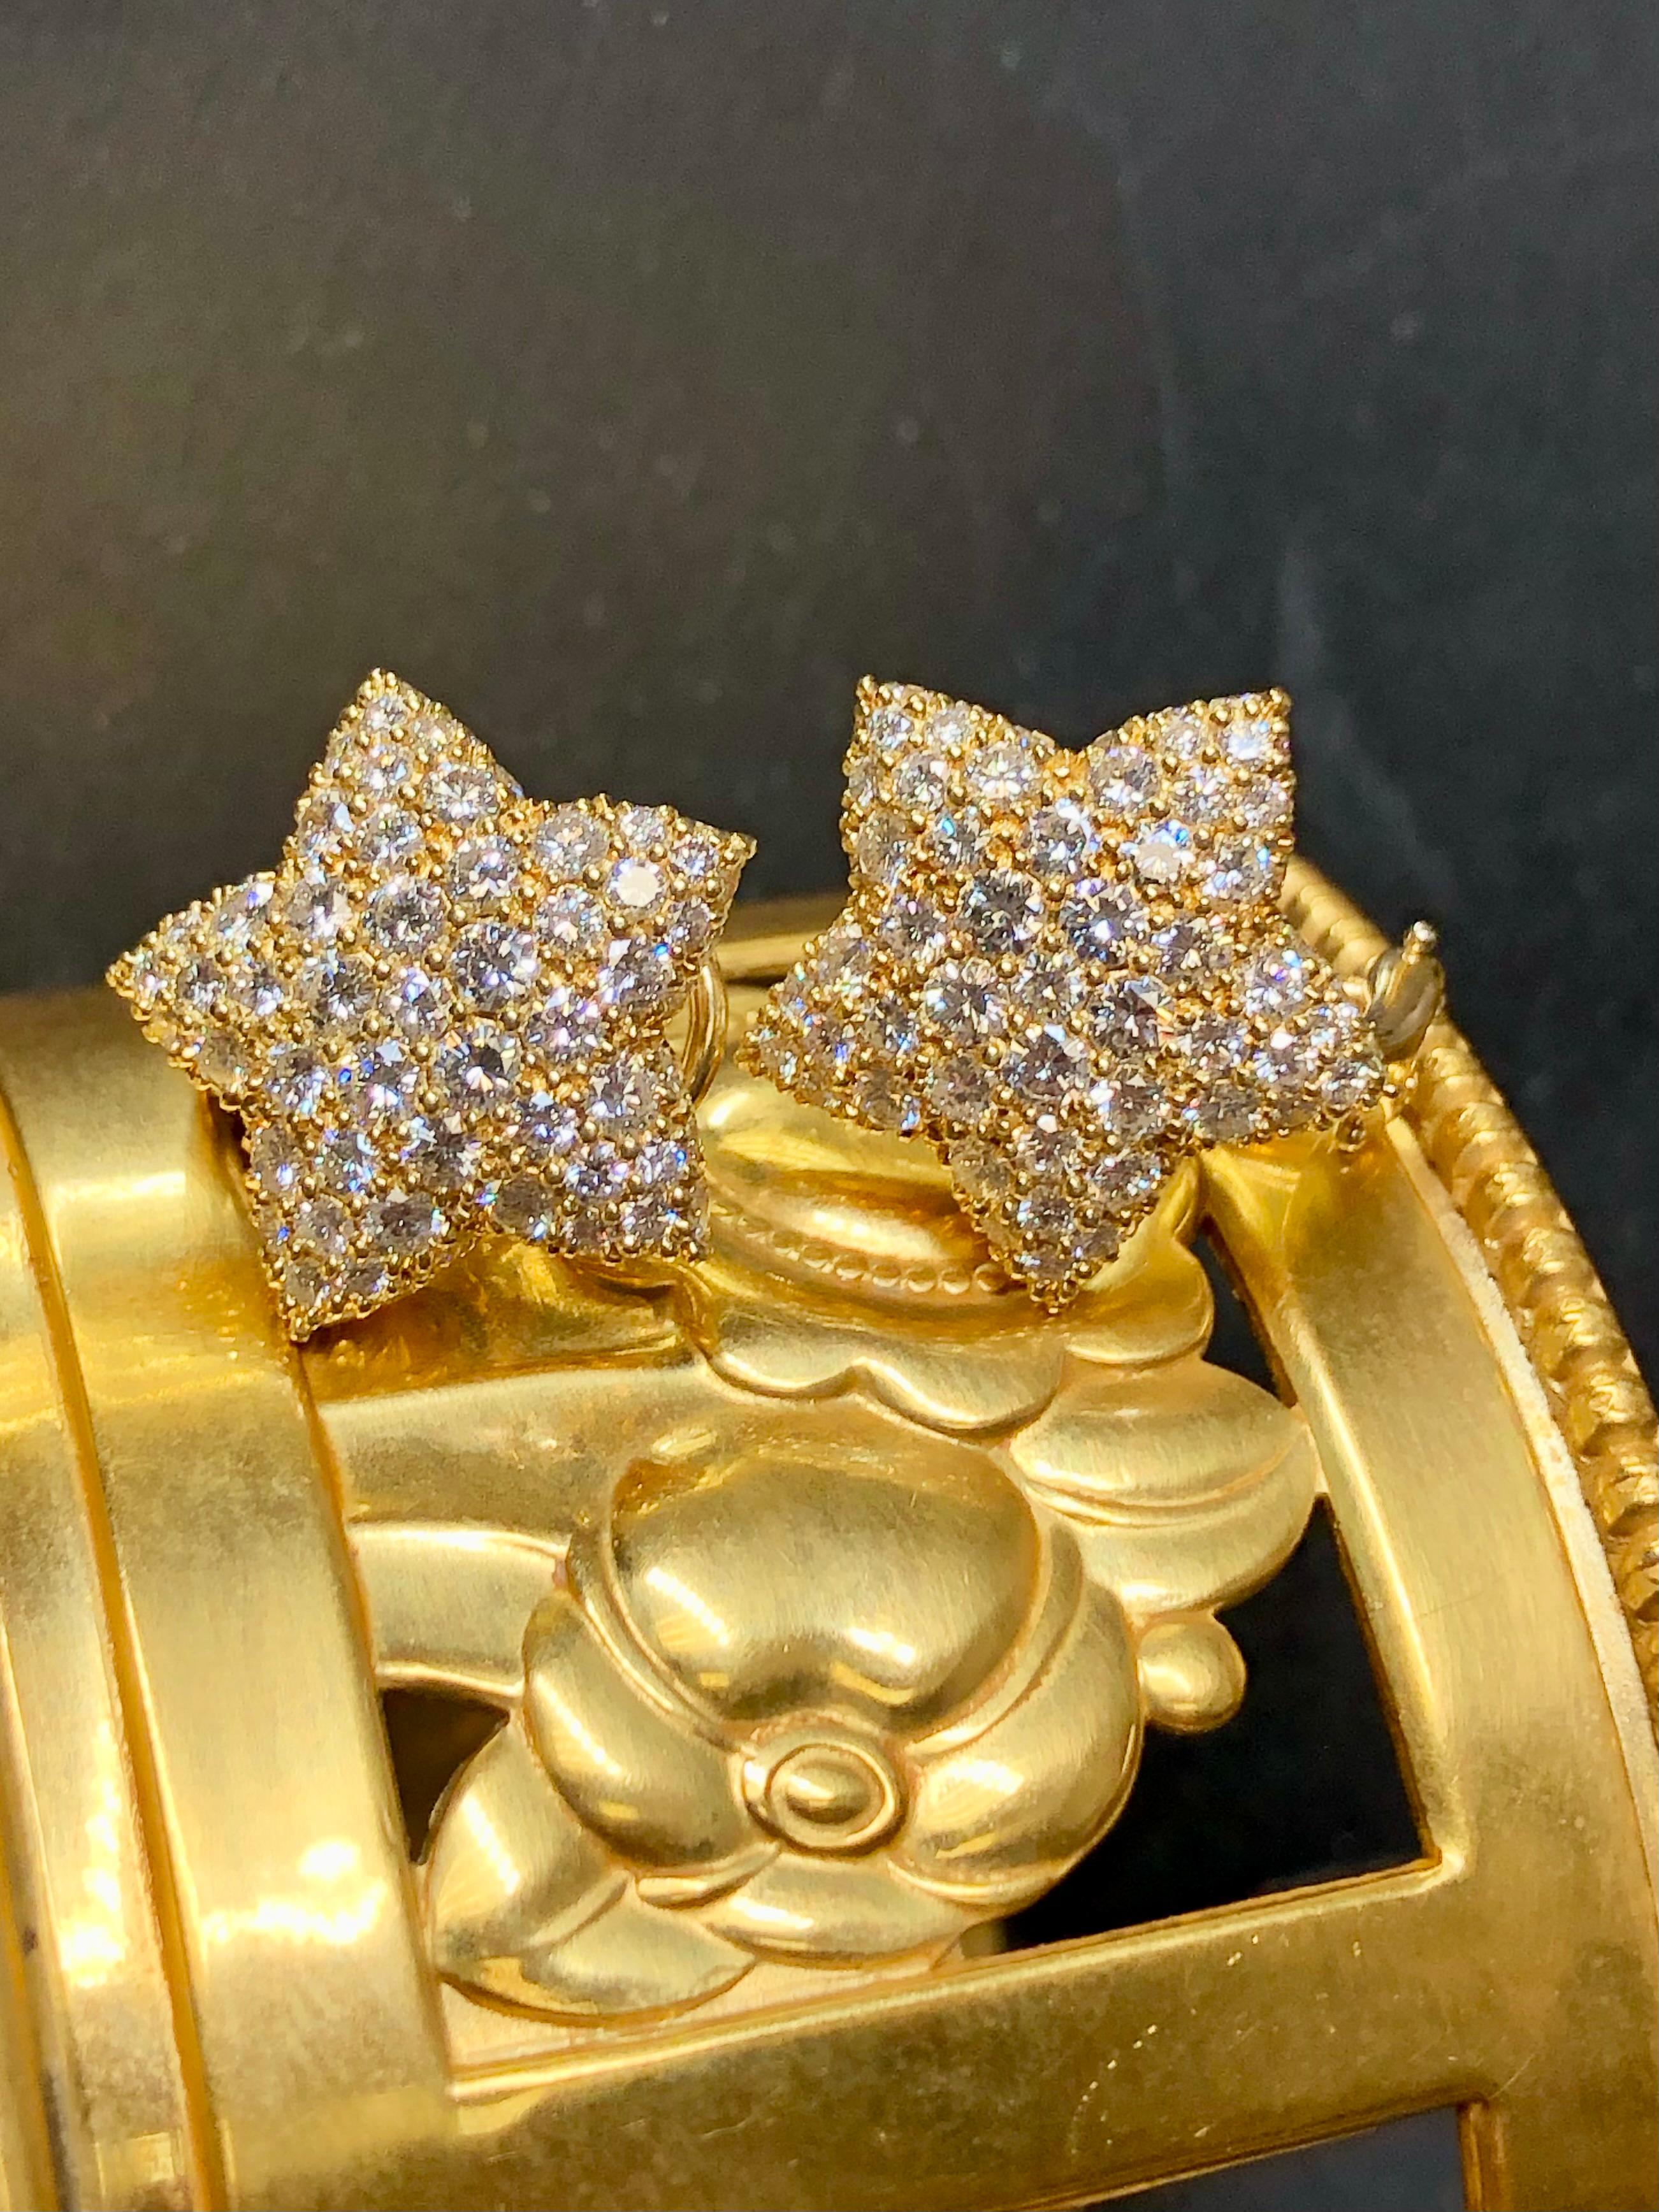 
Stunning… stunning stunning stunning! These earrings are by none other than famous Austrian jewelry designer, Kurt Wayne. They are done in 18K yellow gold and set with approximately 5cttw in absolutely top quality matching round diamonds. All